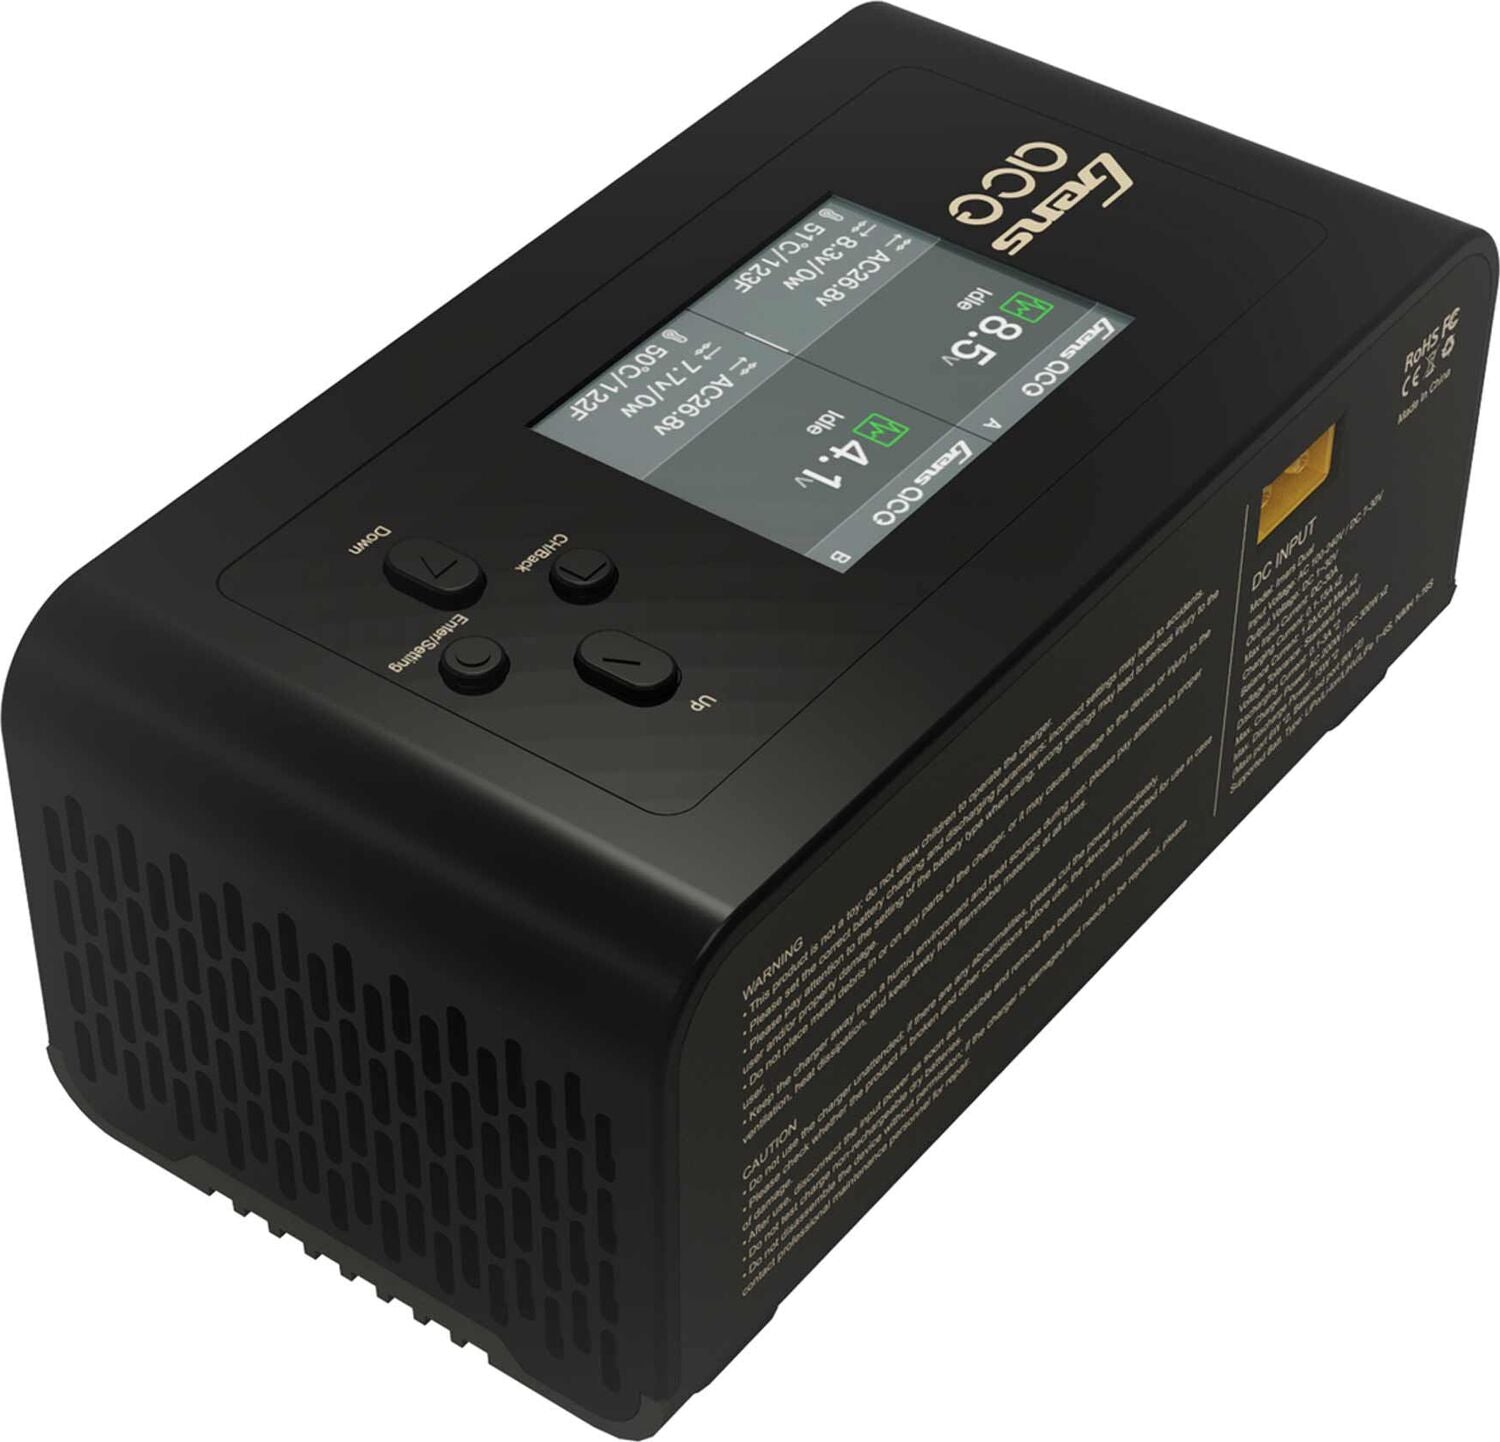 IMars Dual Channel 200W AC / 600W DC 15A Charger, Black